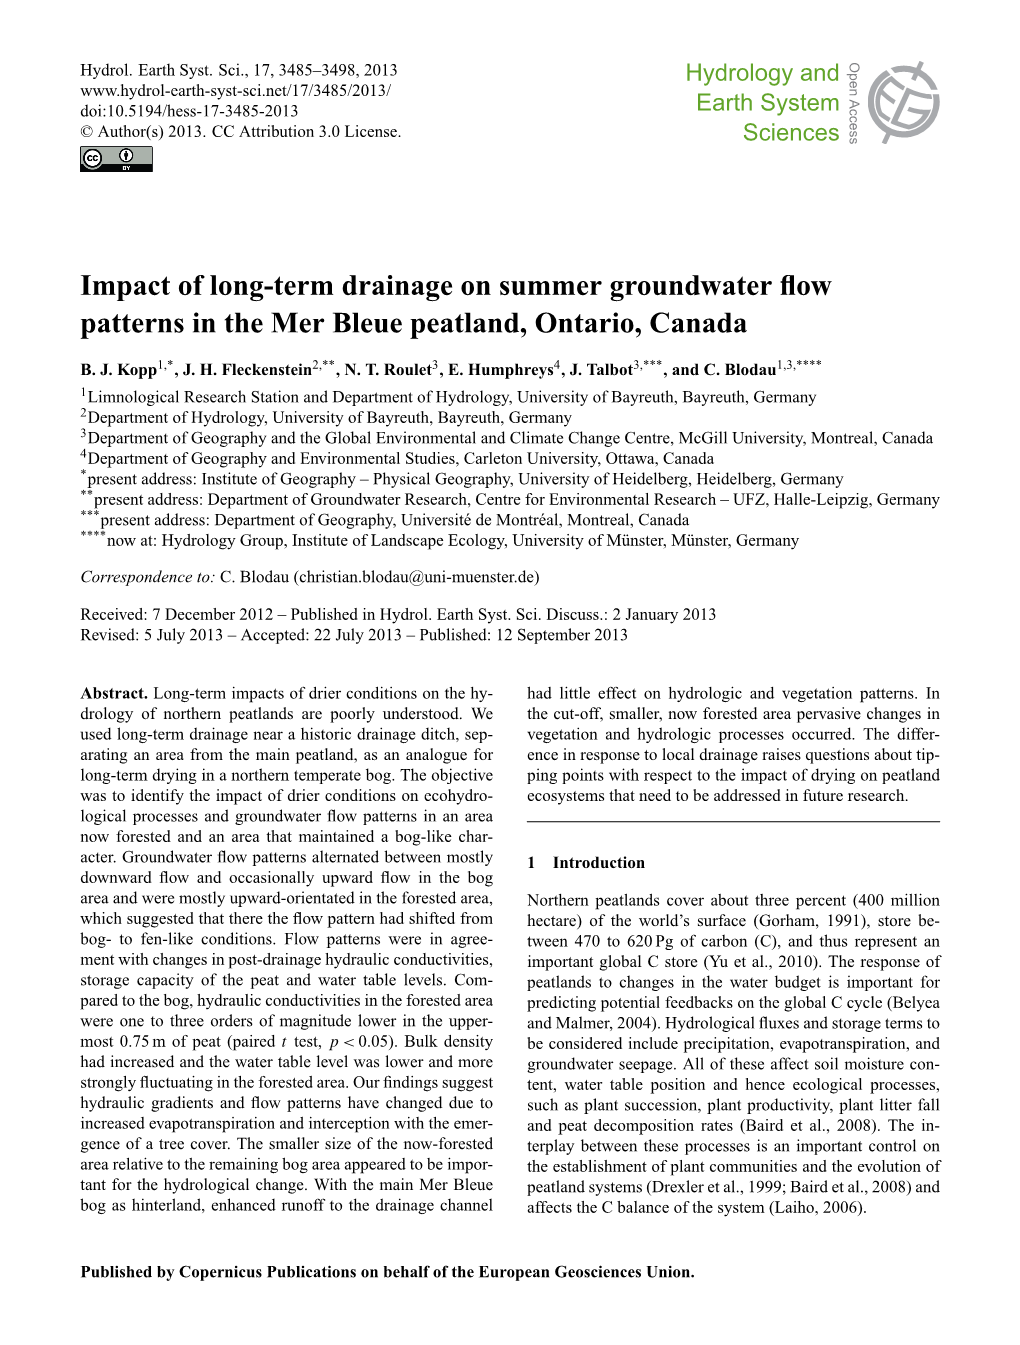 Impact of Long-Term Drainage on Summer Groundwater Flow Patterns